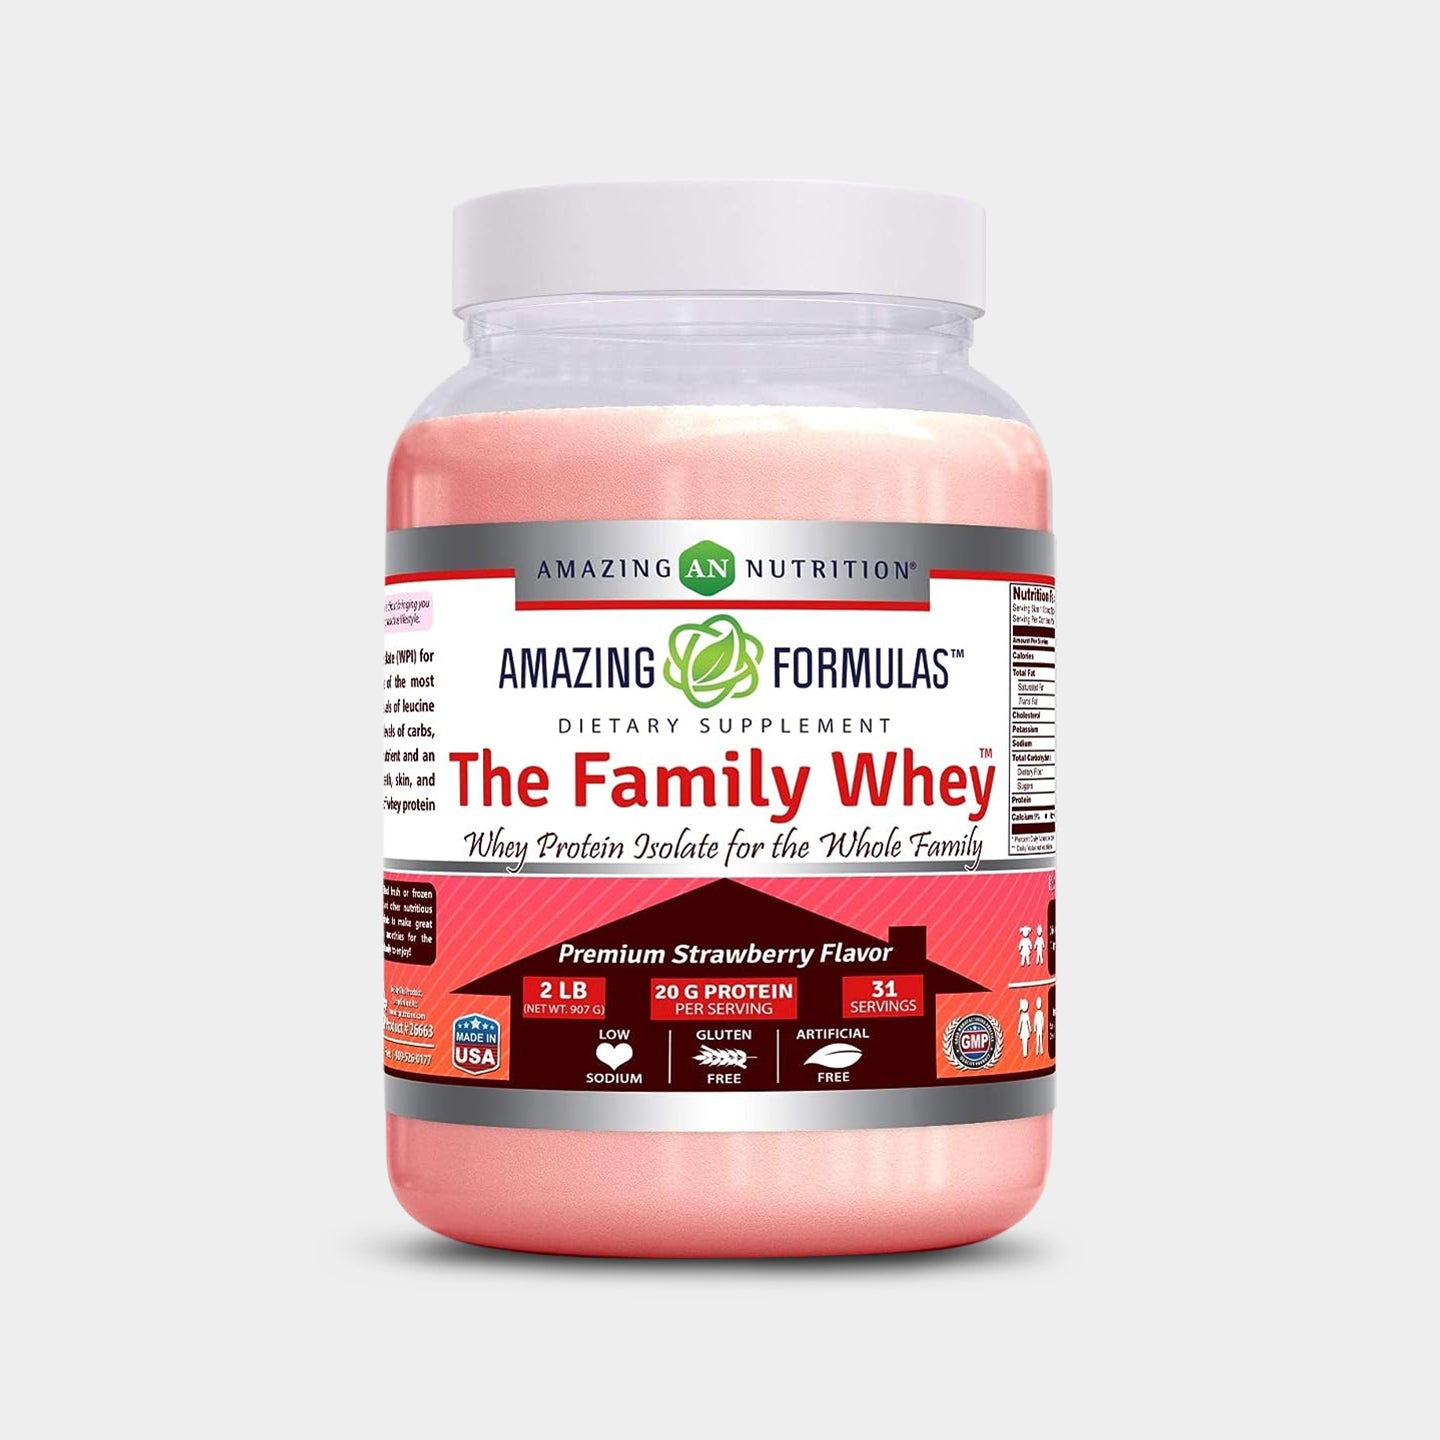 Amazing Formulas The Family Whey - Whey Protein Isolate, Strawberry, 2 Lbs A1